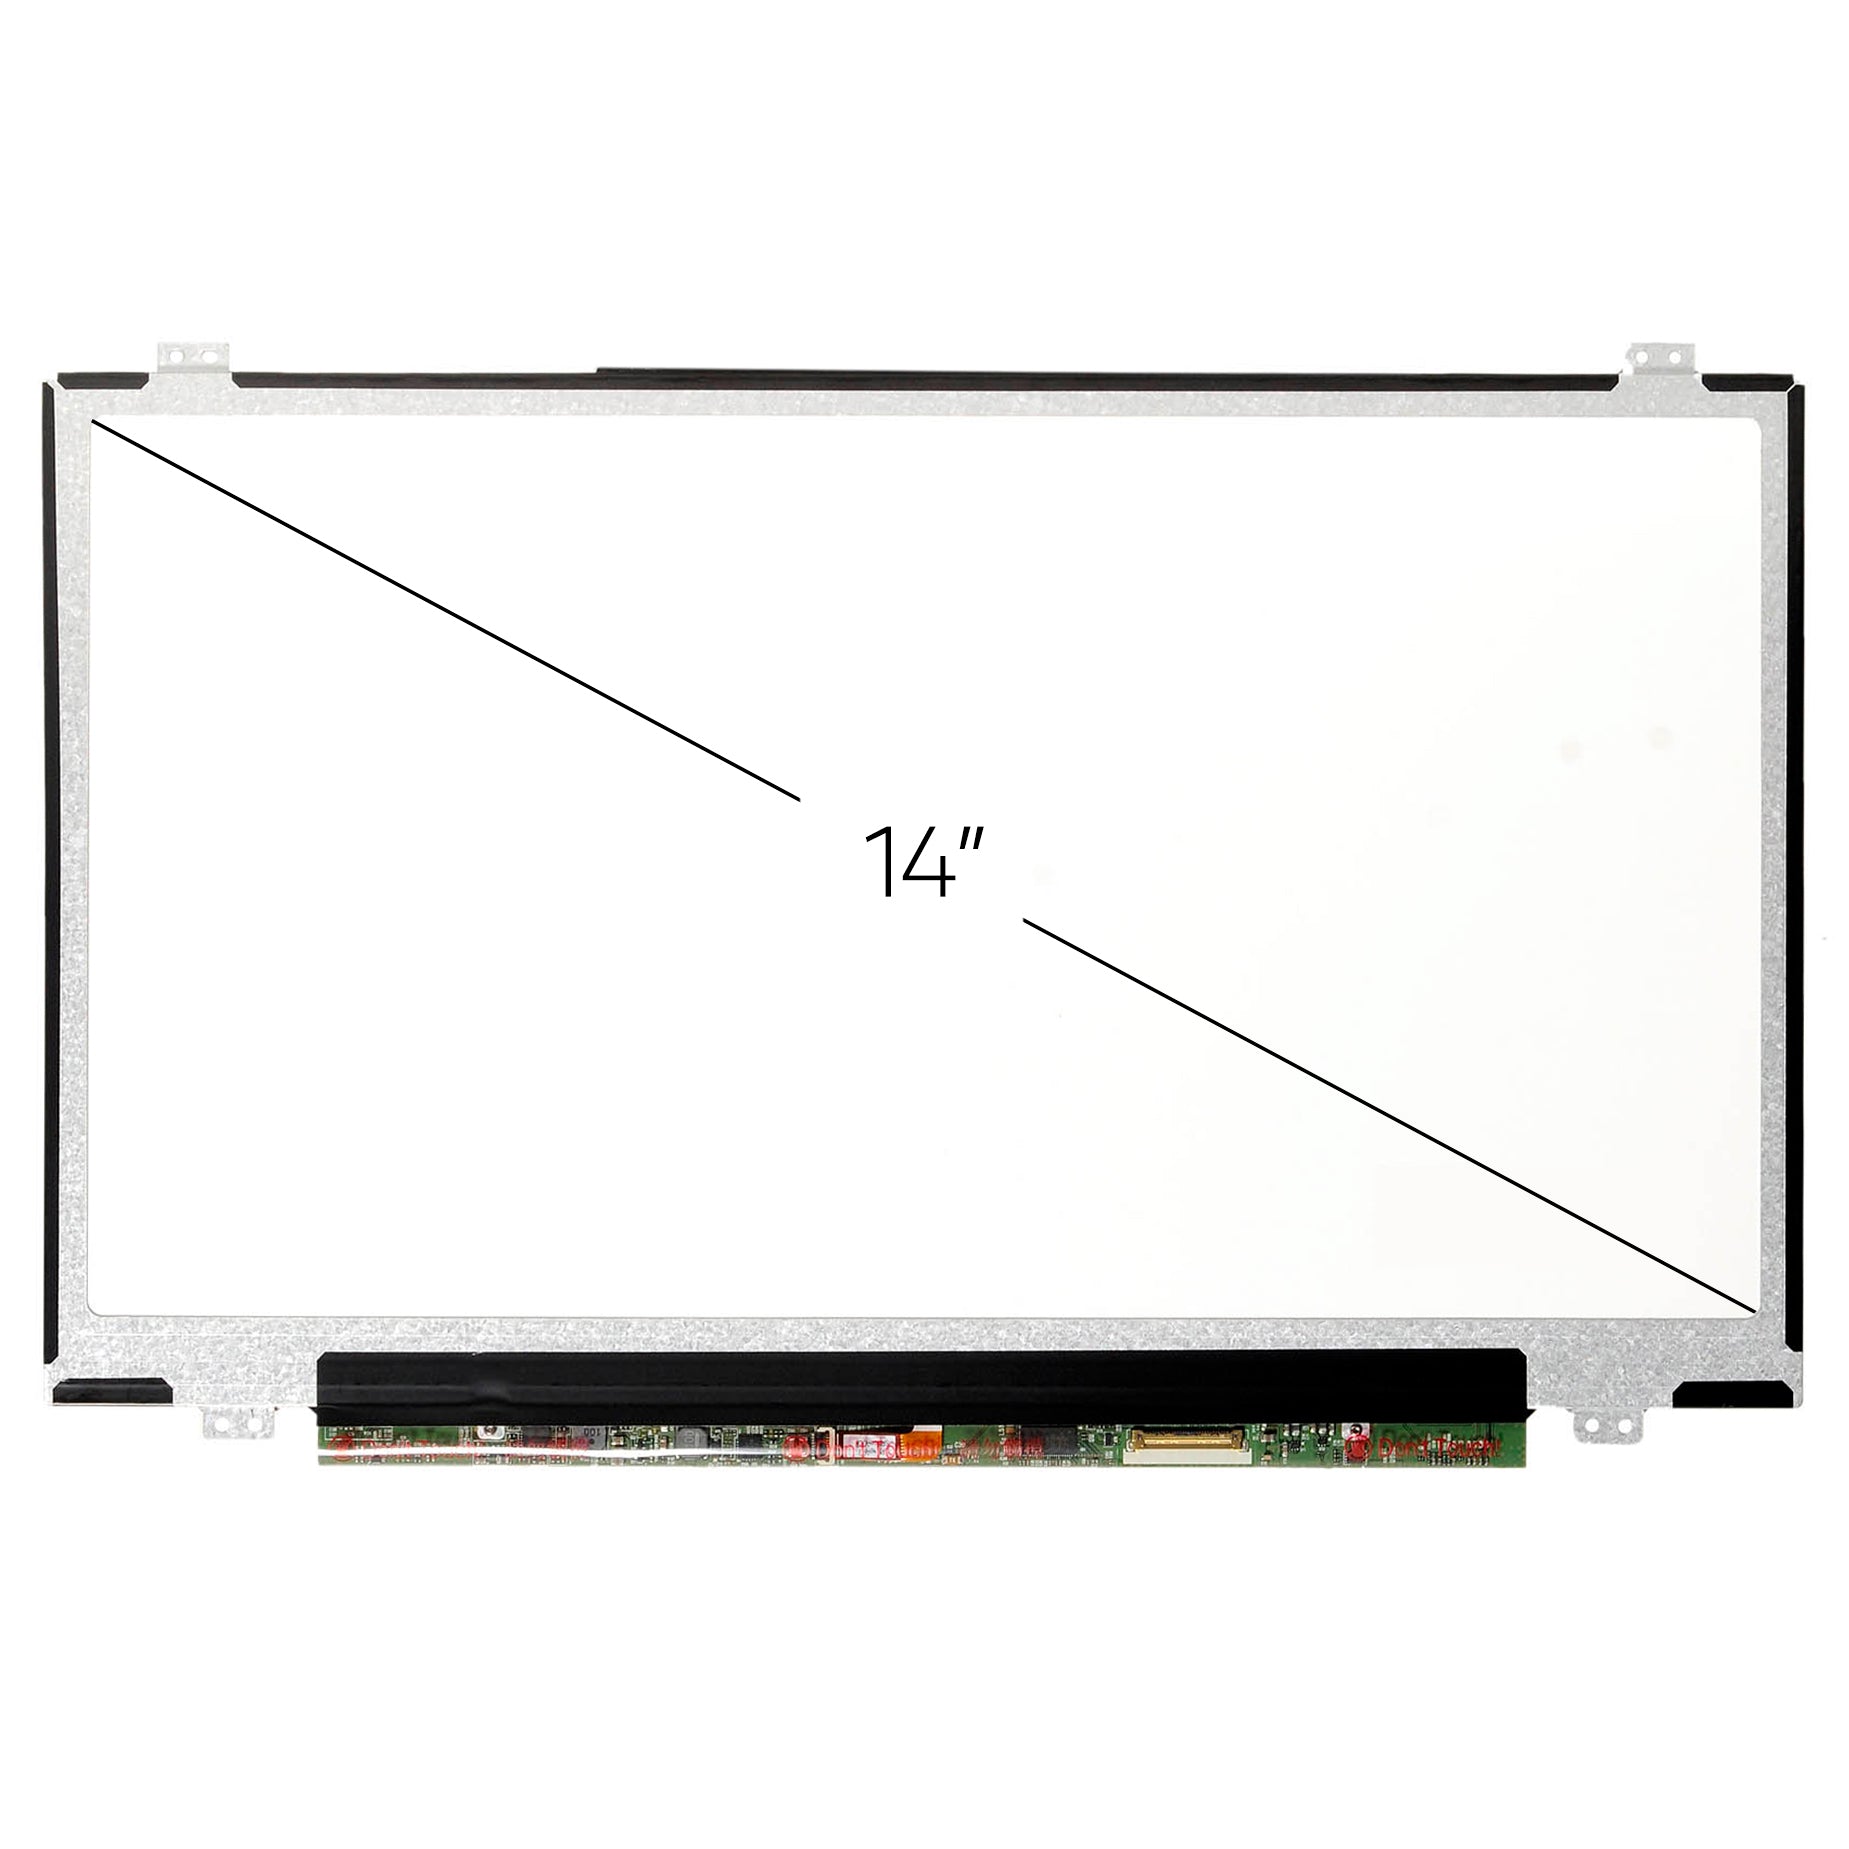 Screen Replacement for Acer Chromebook CB3-431-C5EX FHD 1920x1080 IPS Matte LCD LED Display